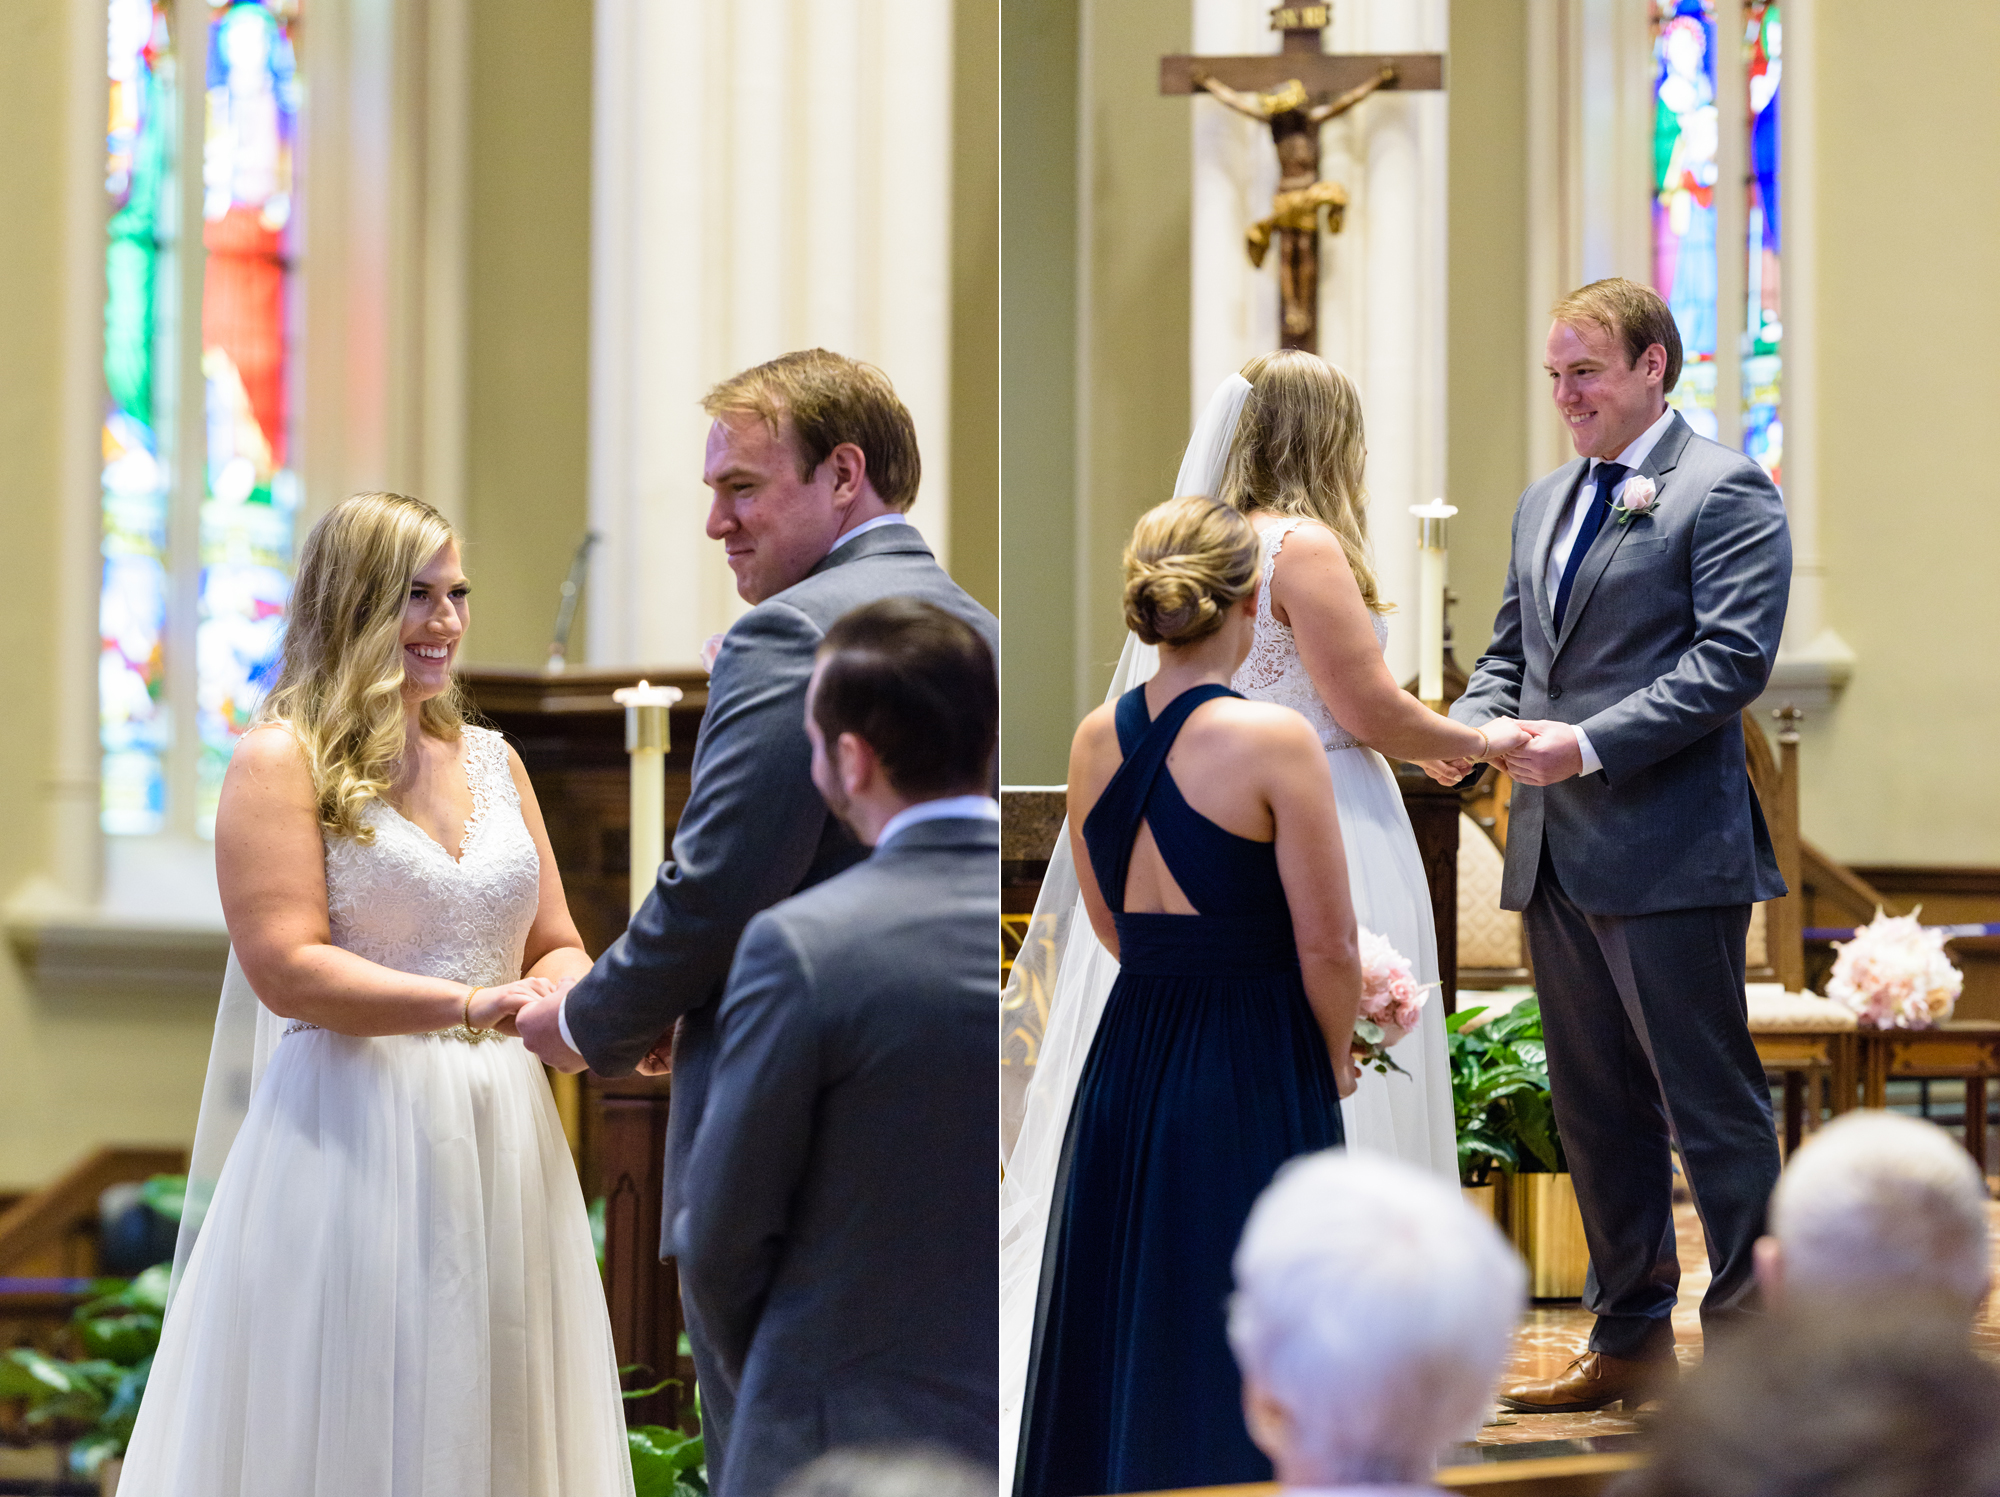 Bride & Groom exchanging vows at a ceremony at the Basilica of the Sacred Heart on the campus of Notre Dame